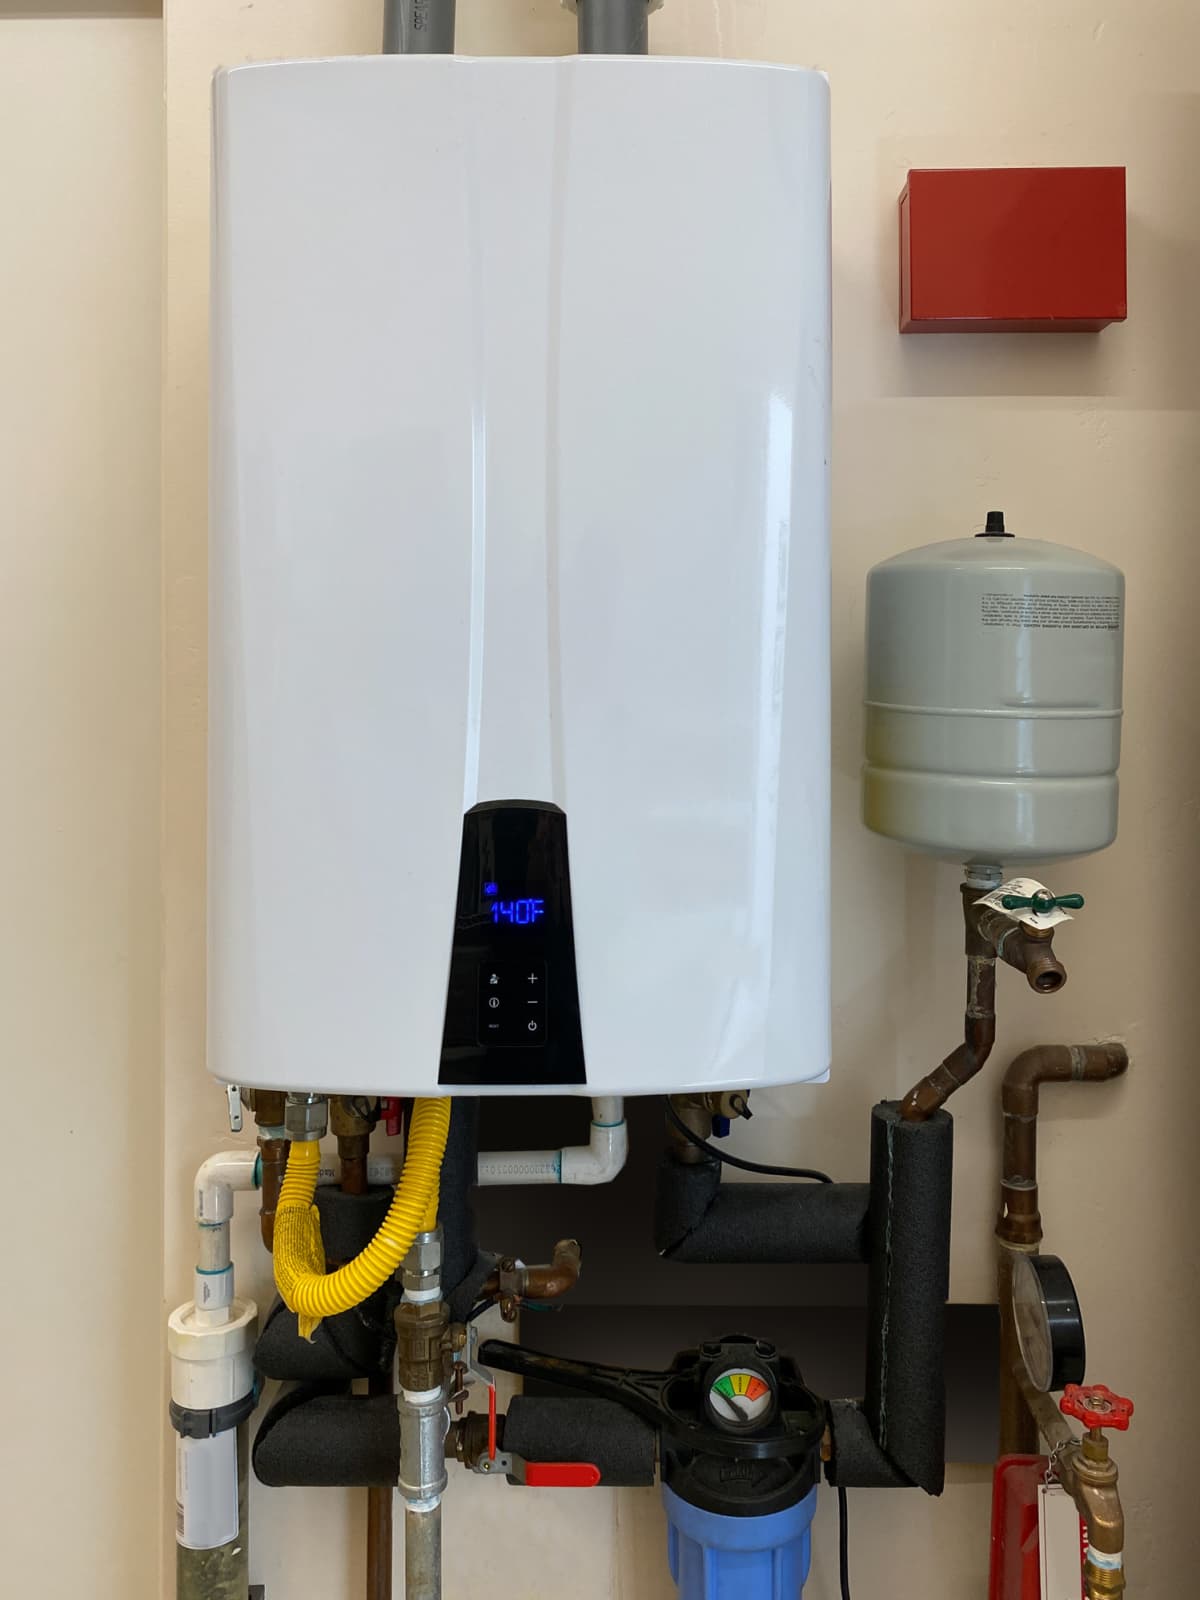 A tankless hot water heater set at 140 degrees Fahrenheit